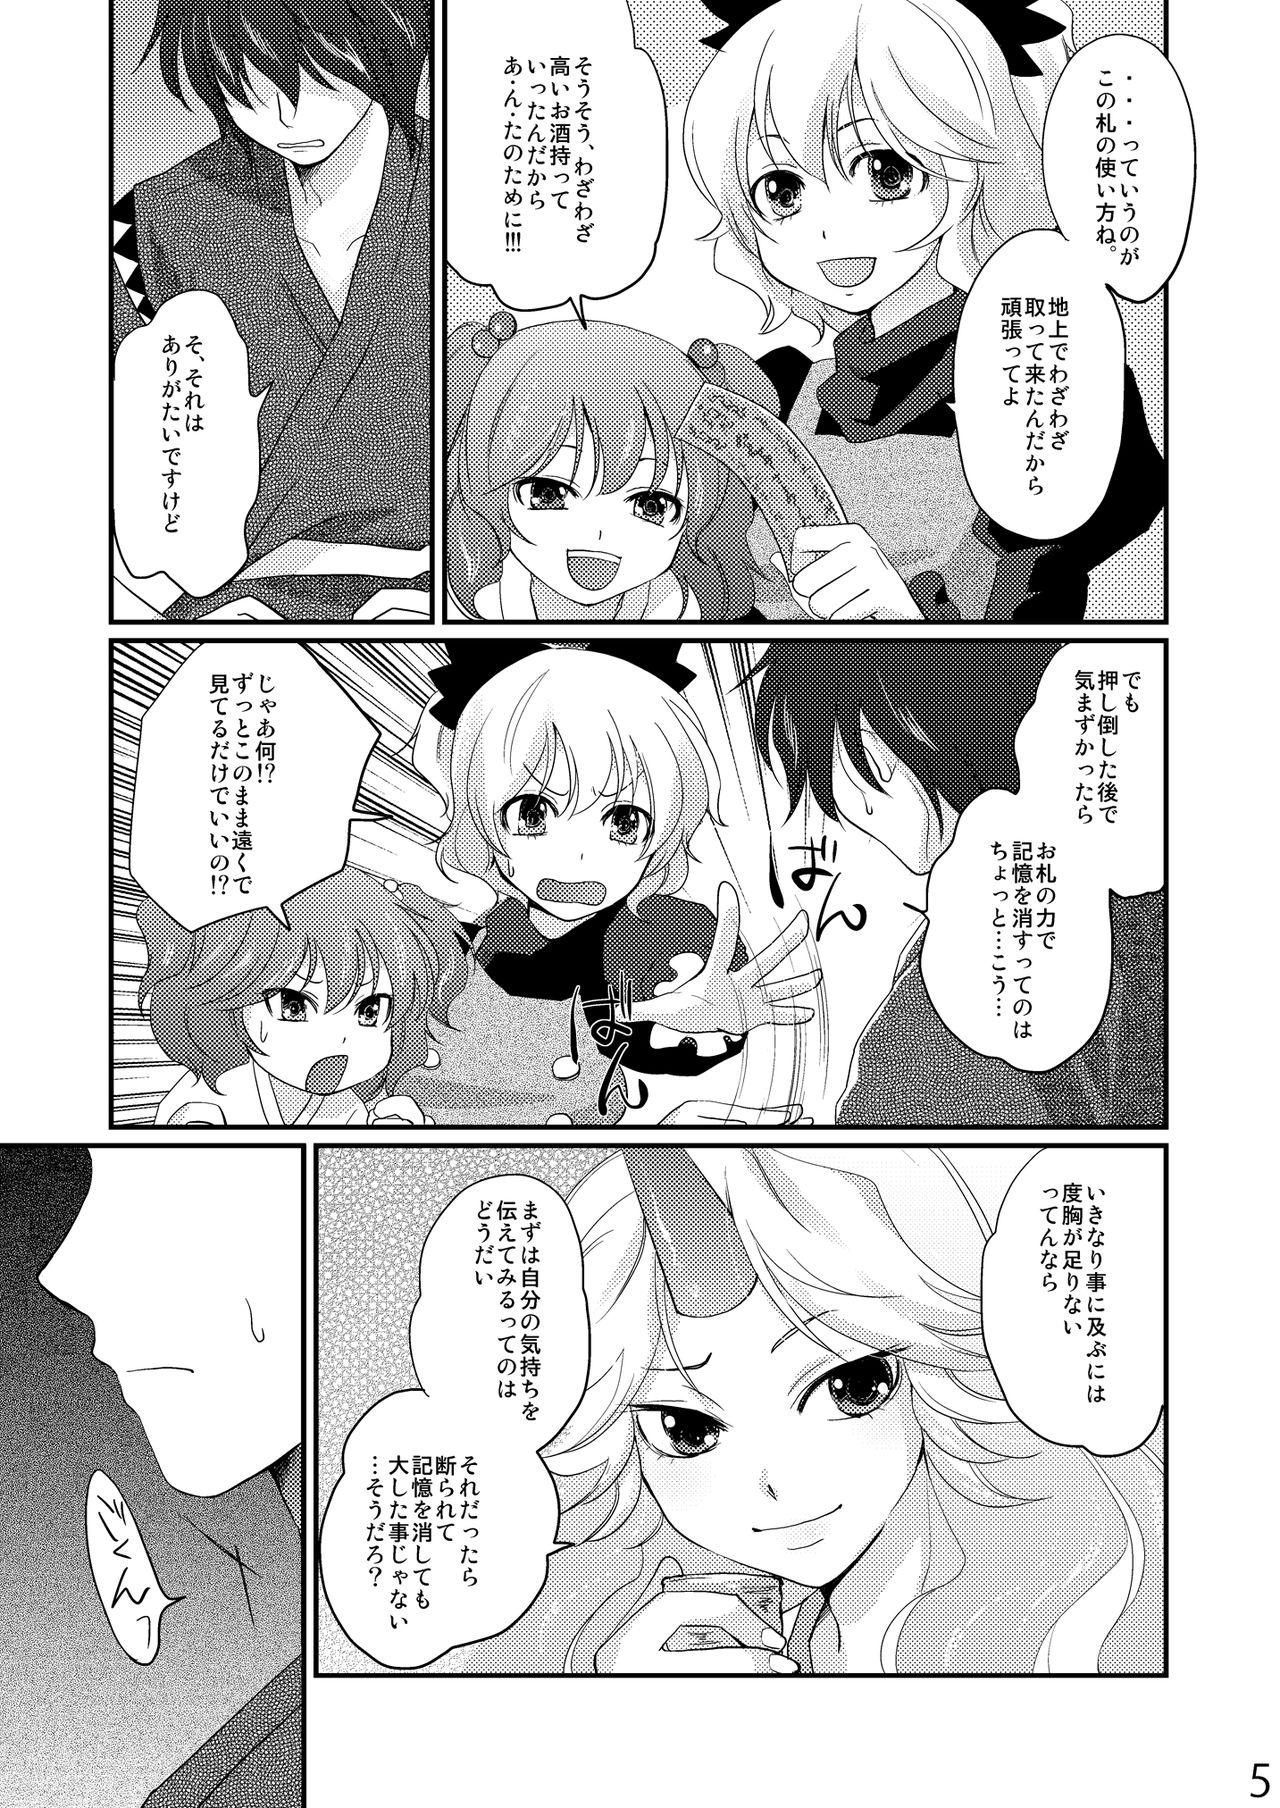 Small Tits Porn Opparusui - Touhou project Funny - Page 5